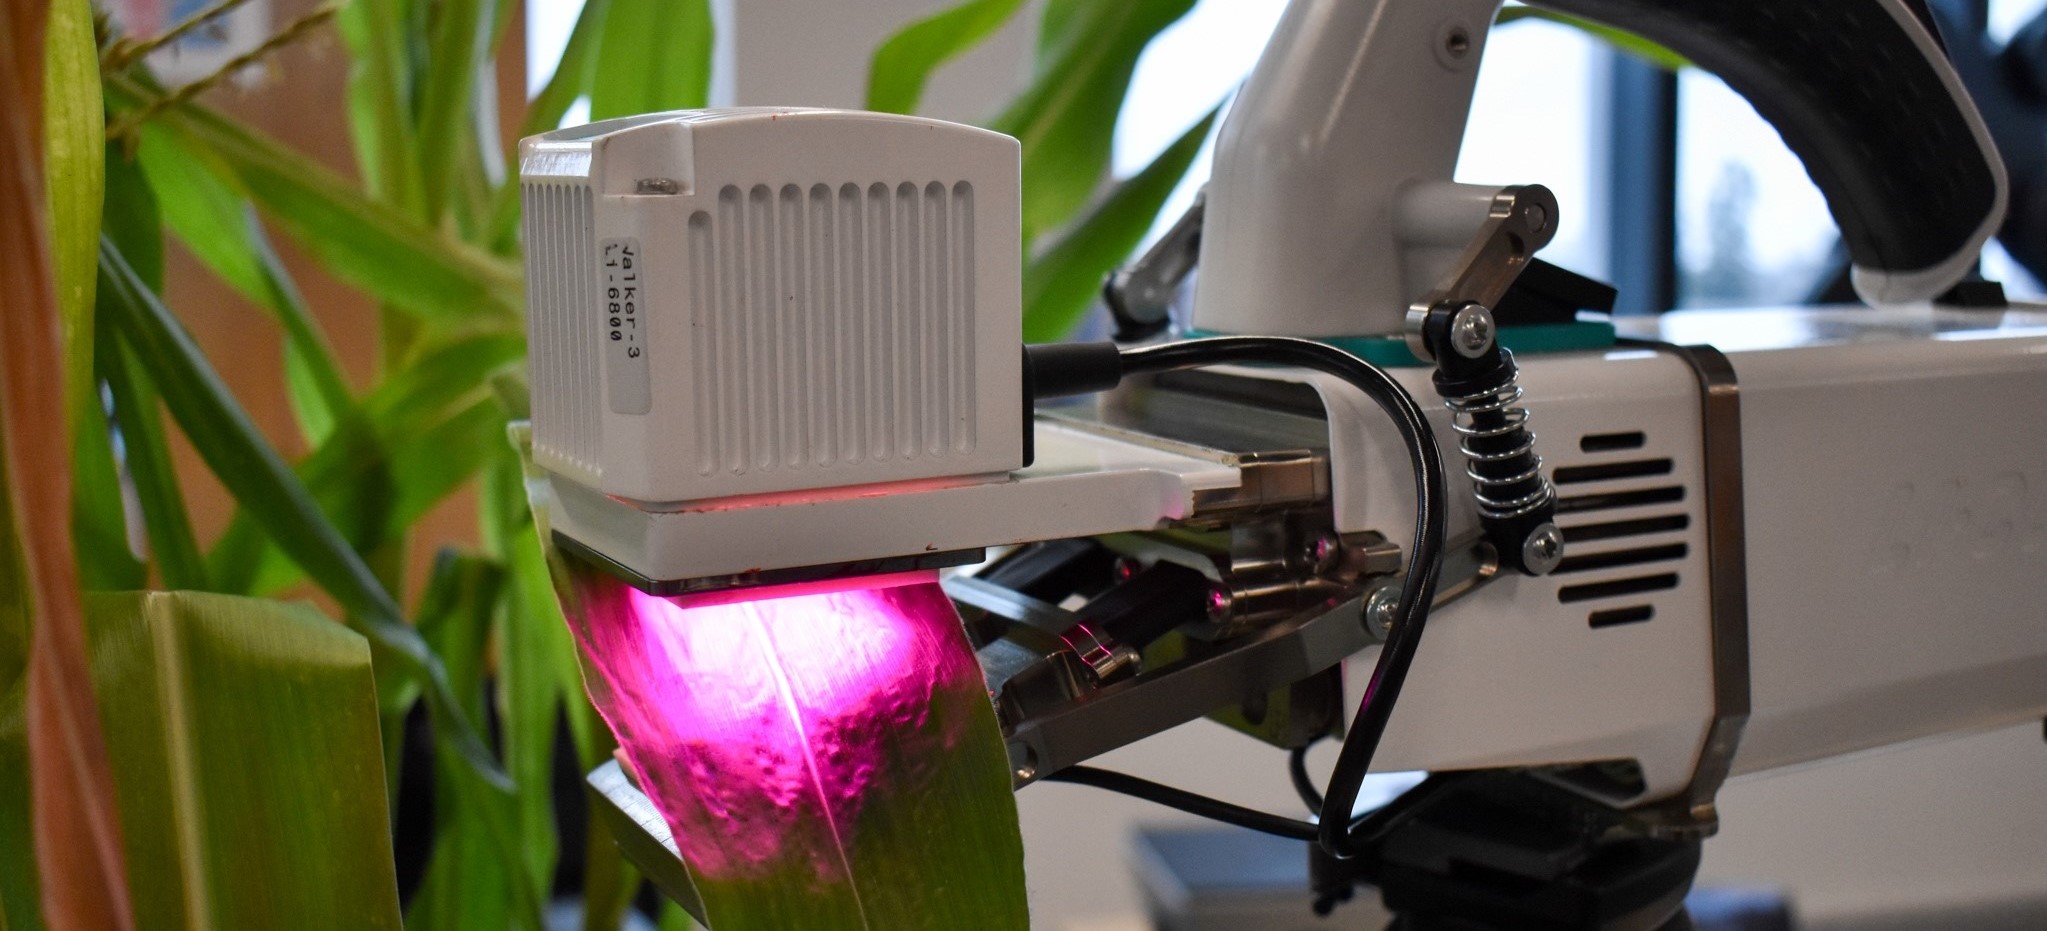 A scientific instrument clamps on the leaf of a plant, emitting pink light onto the leaf